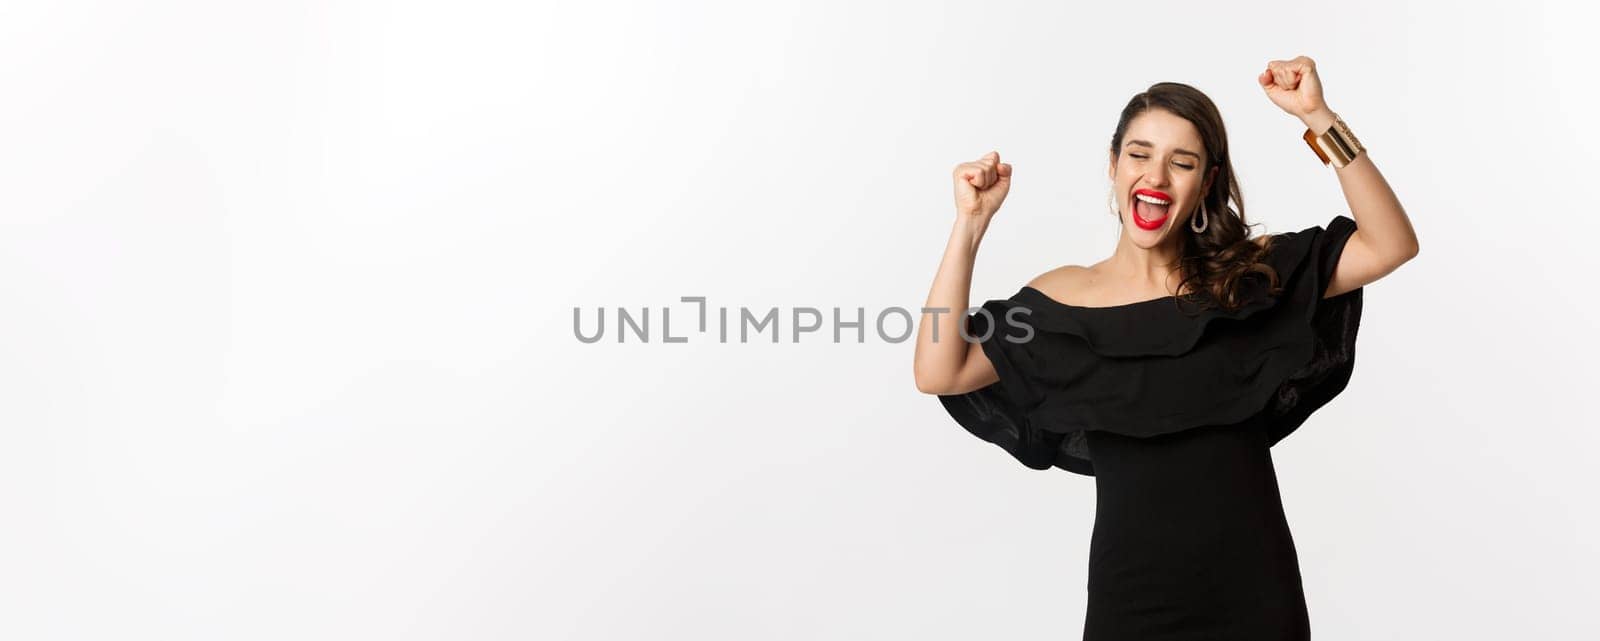 Fashion and beauty. Successful pretty woman in black dress celebrating, rejoicing of winning, triumphing over white background.